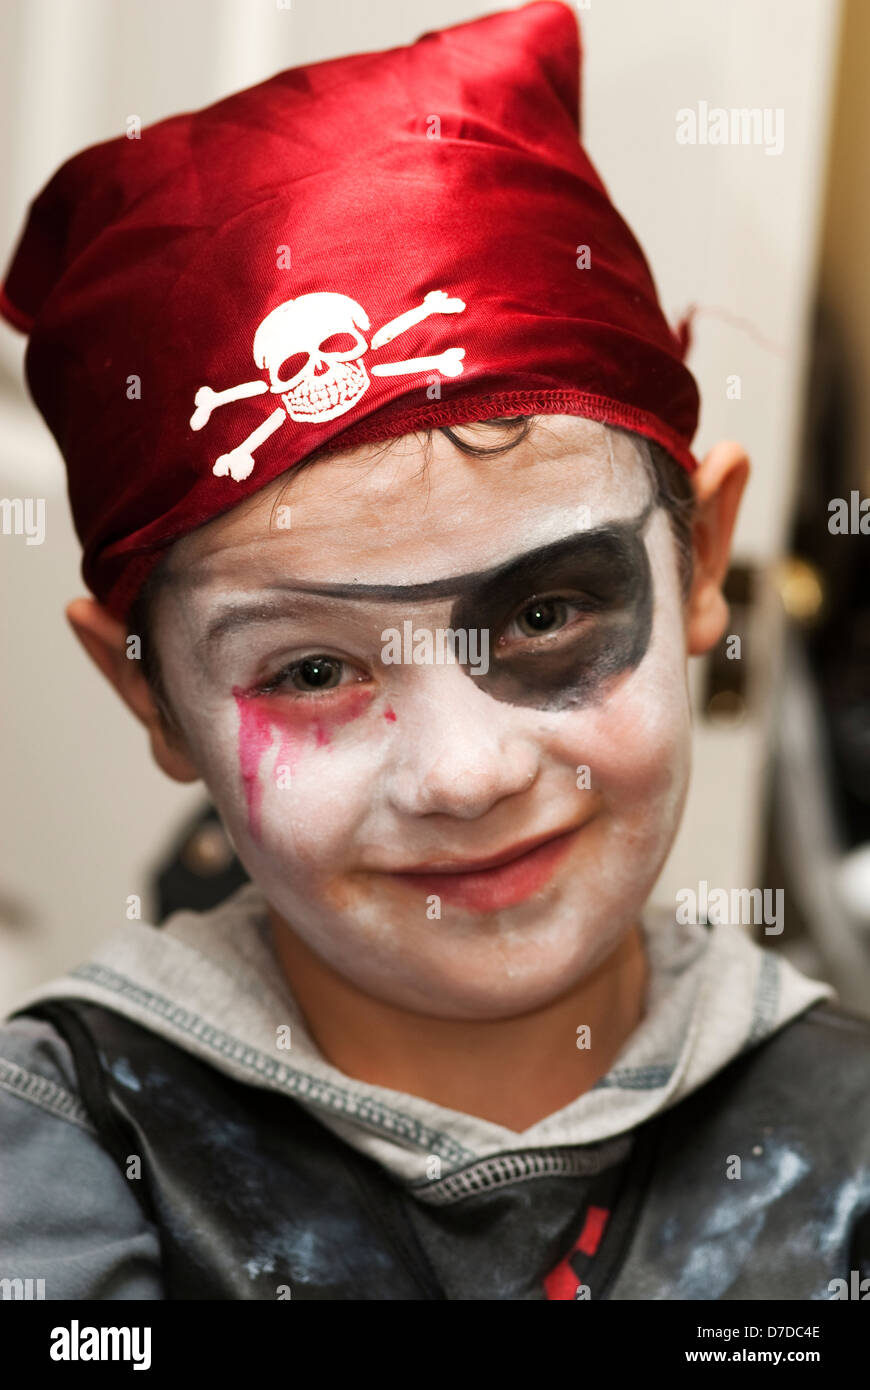 A child dressed as a pirate Stock Photo